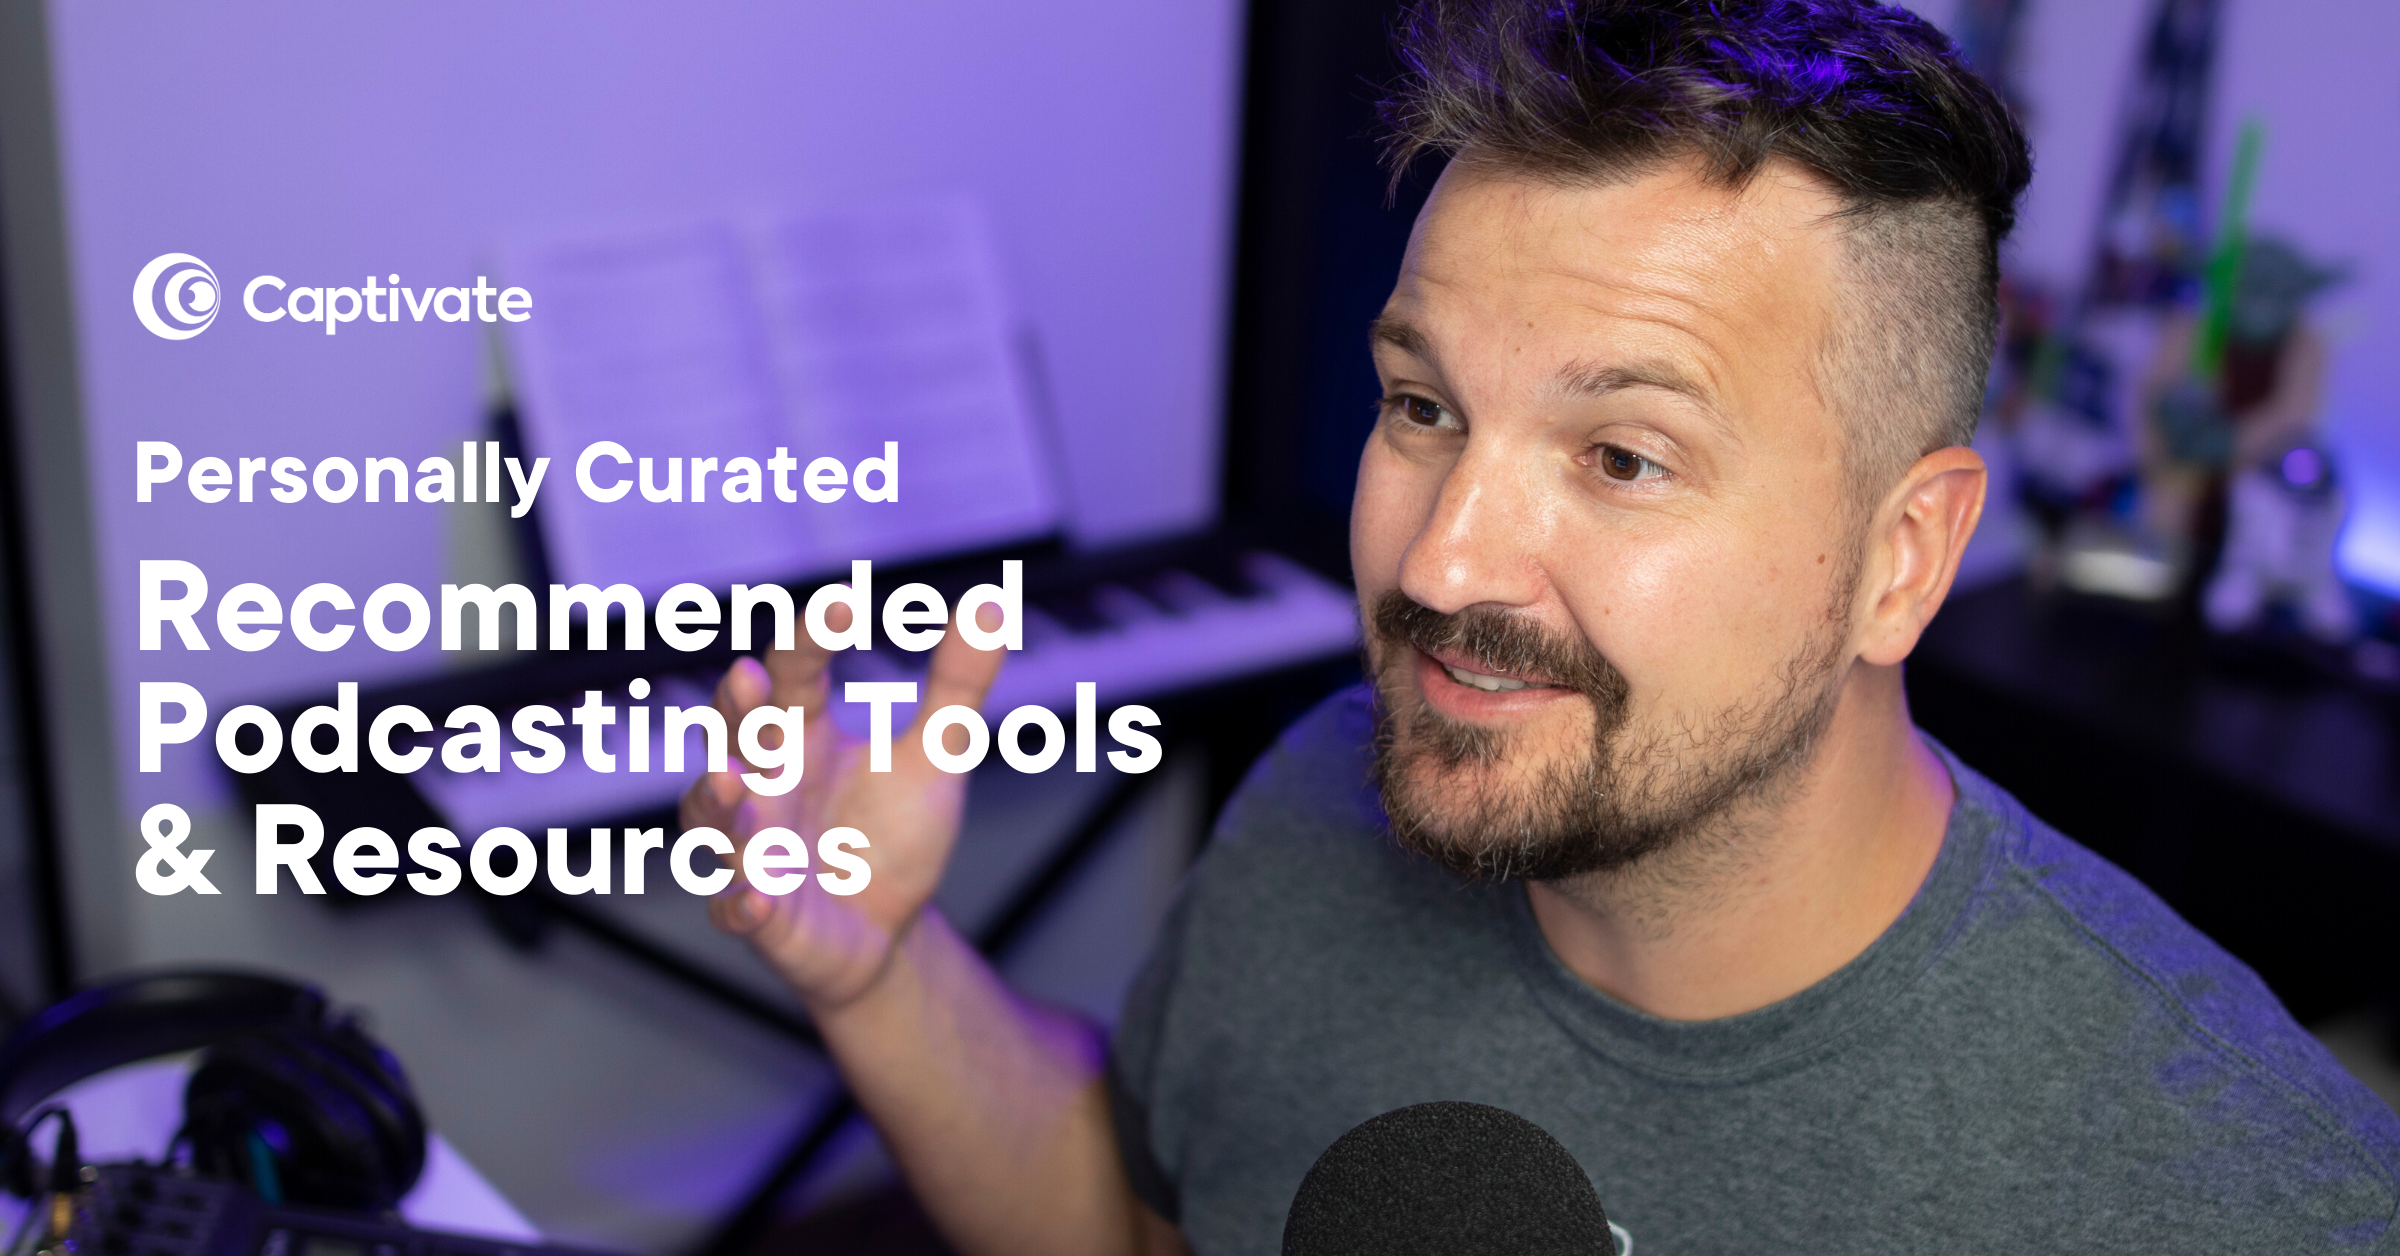 Recommended podcasting tools and resources from the Captivate podcast hosting, analytics & distribution team. Personally curated, just for you.